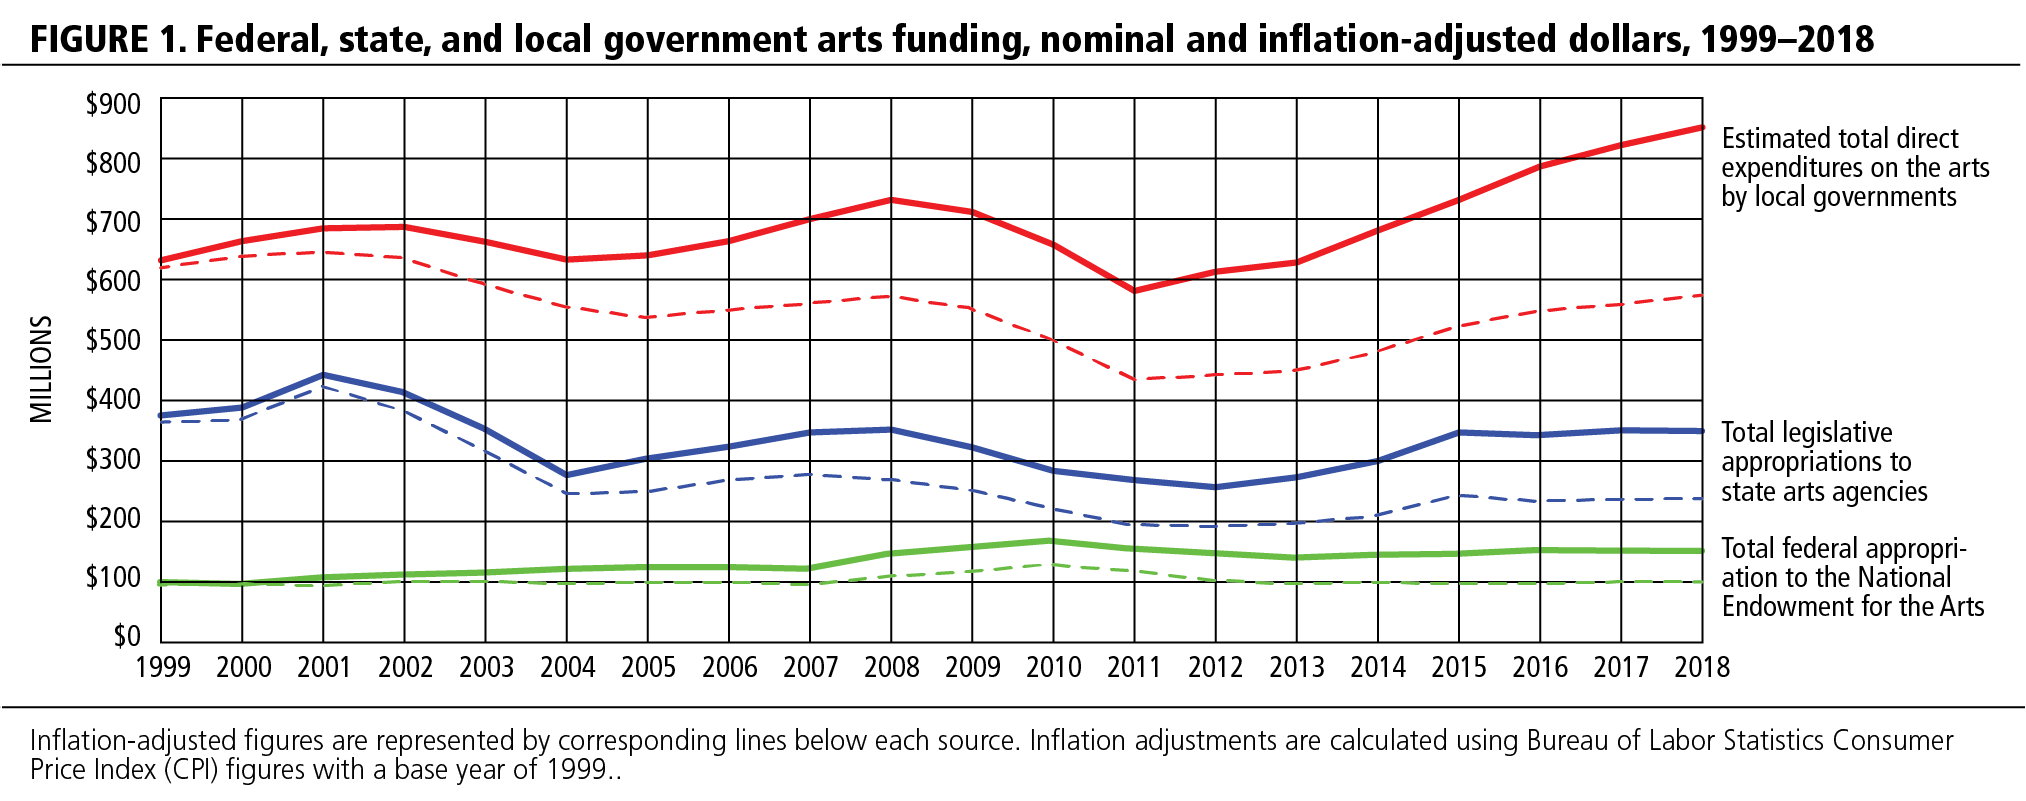 FIGURE 1. Federal, state, and local government arts funding, nominal and inflation-adjusted dollars, 1999-2018